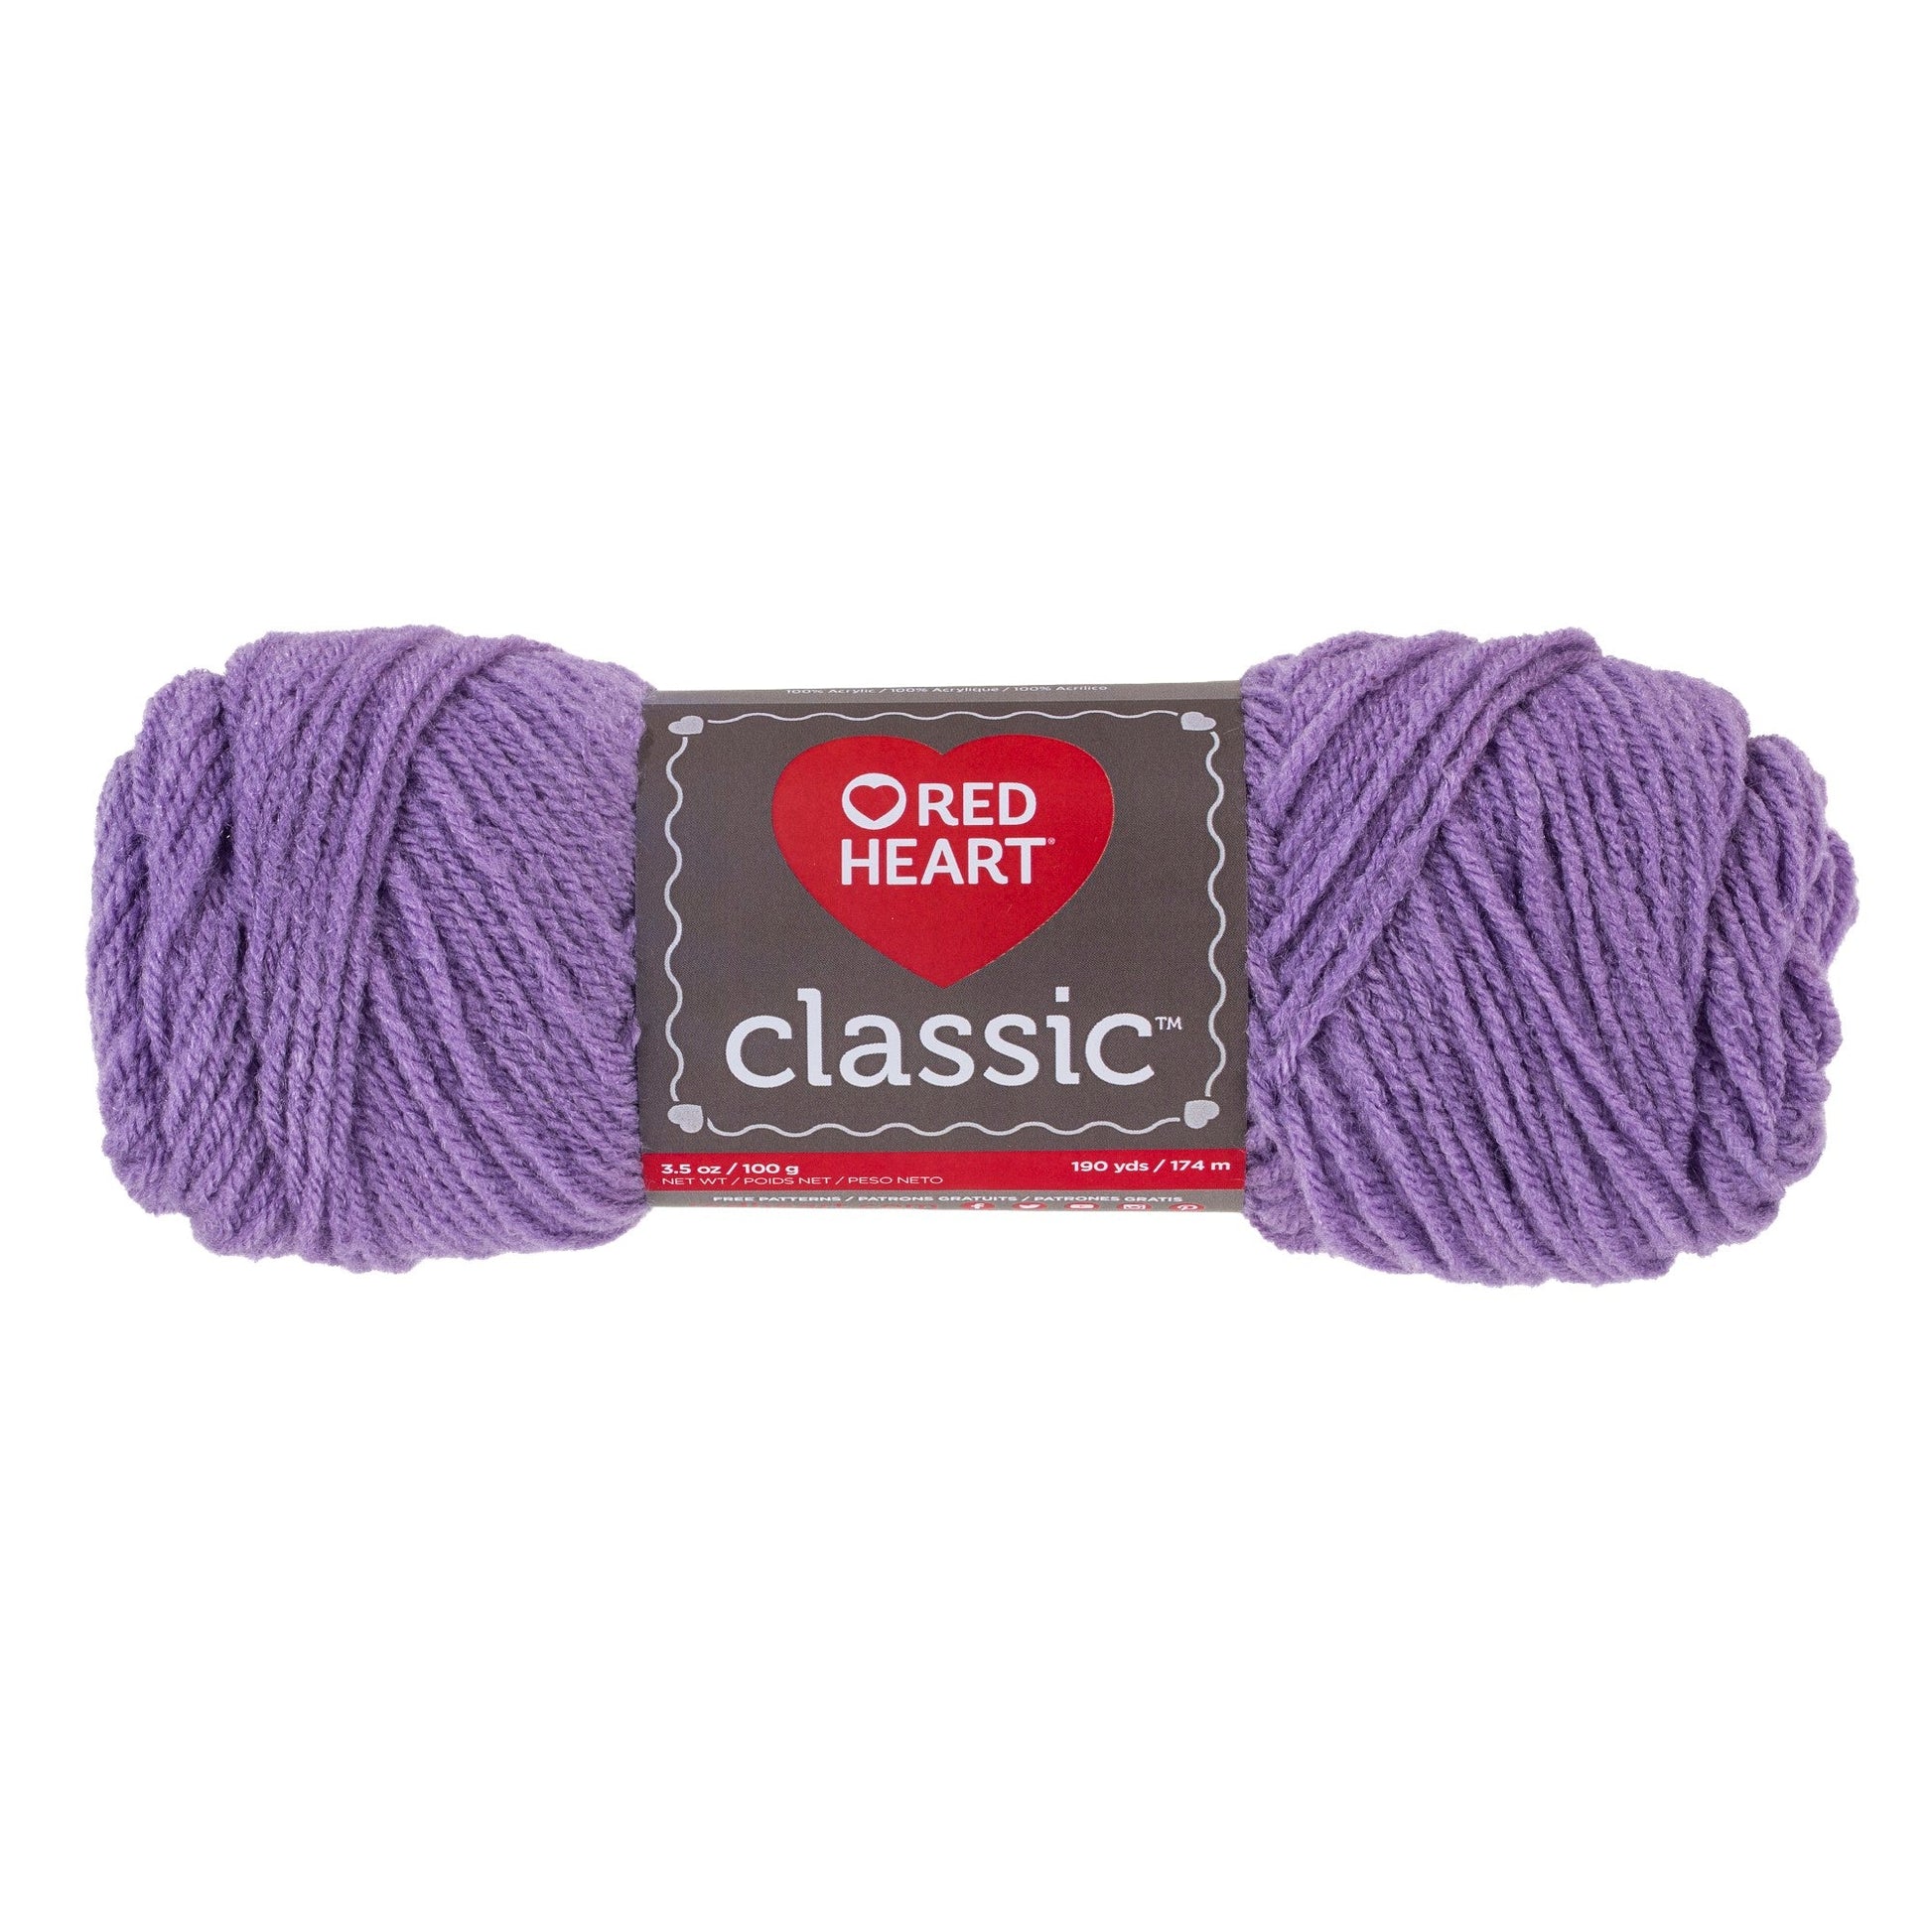 Red Heart Classic Yarn - Clearance shades Lavender